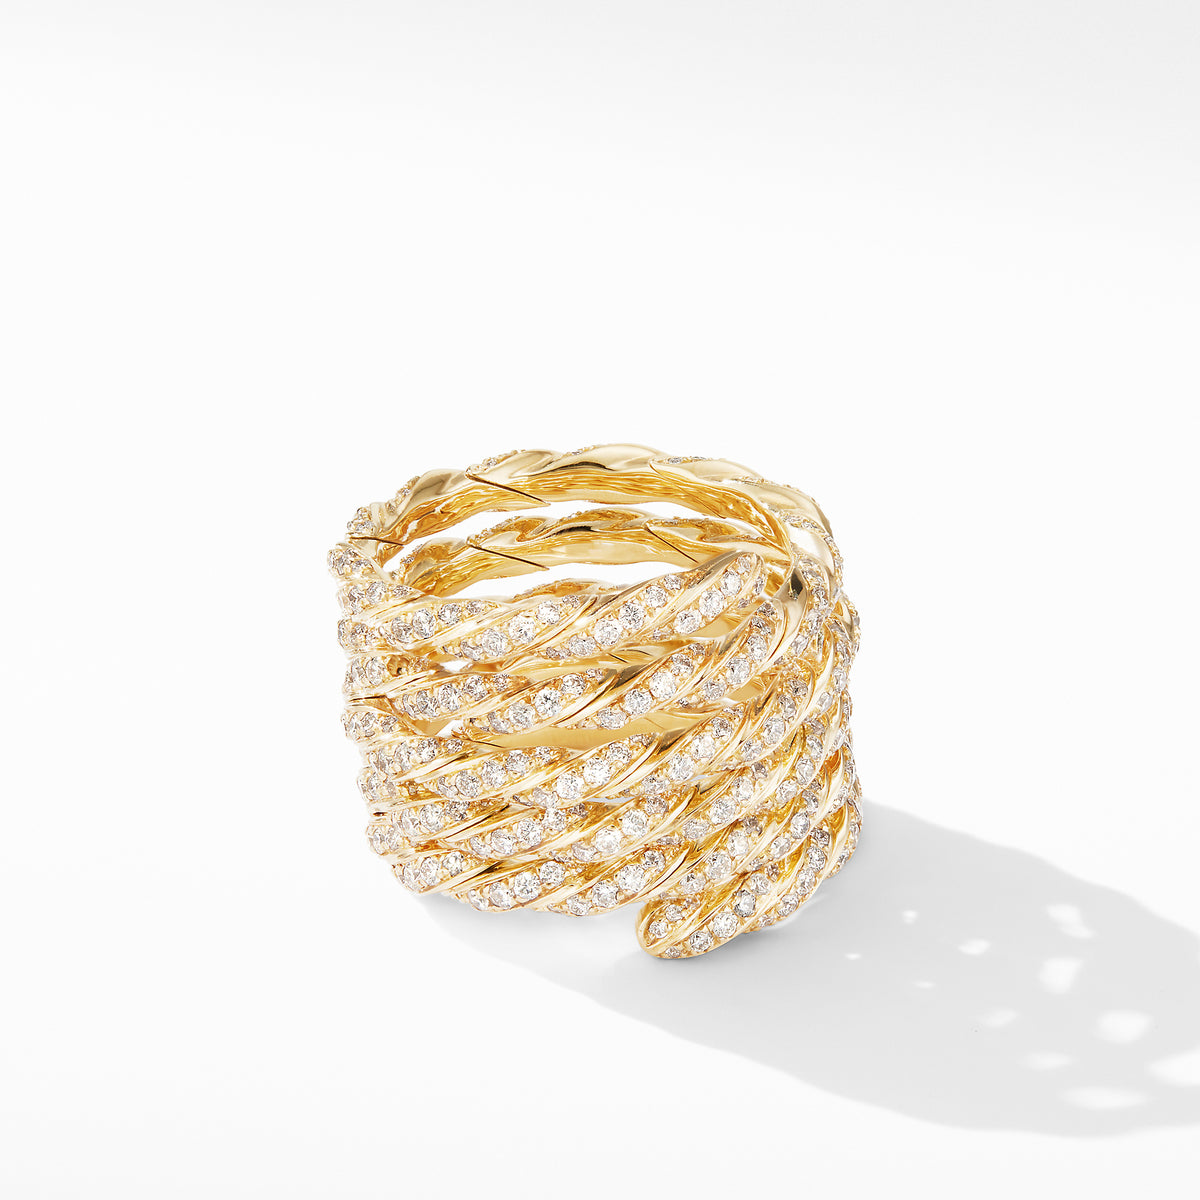 Pavéflex Coil Ring in 18K Yellow Gold with Diamonds, Size 7